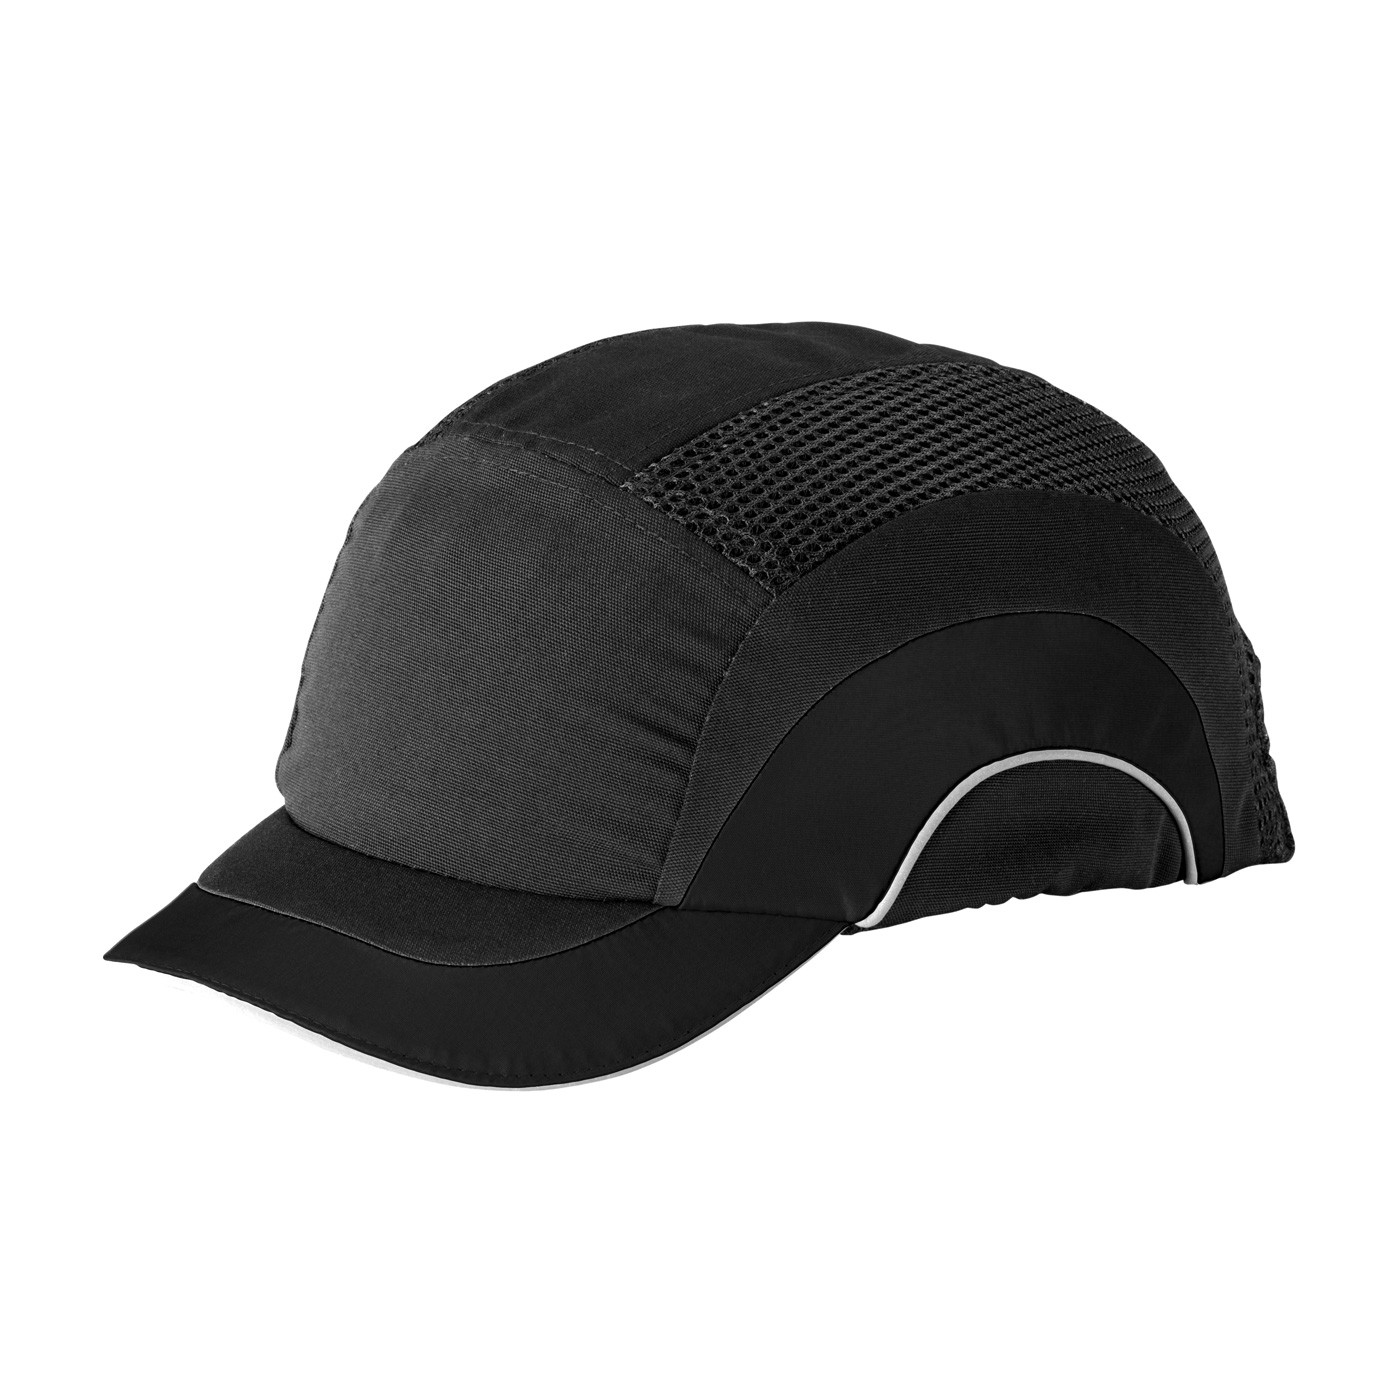 HardCap A1+™ Baseball Style Bump Cap with HDPE Protective Liner and Adjustable Back - Short Brim  (#282-ABS150)